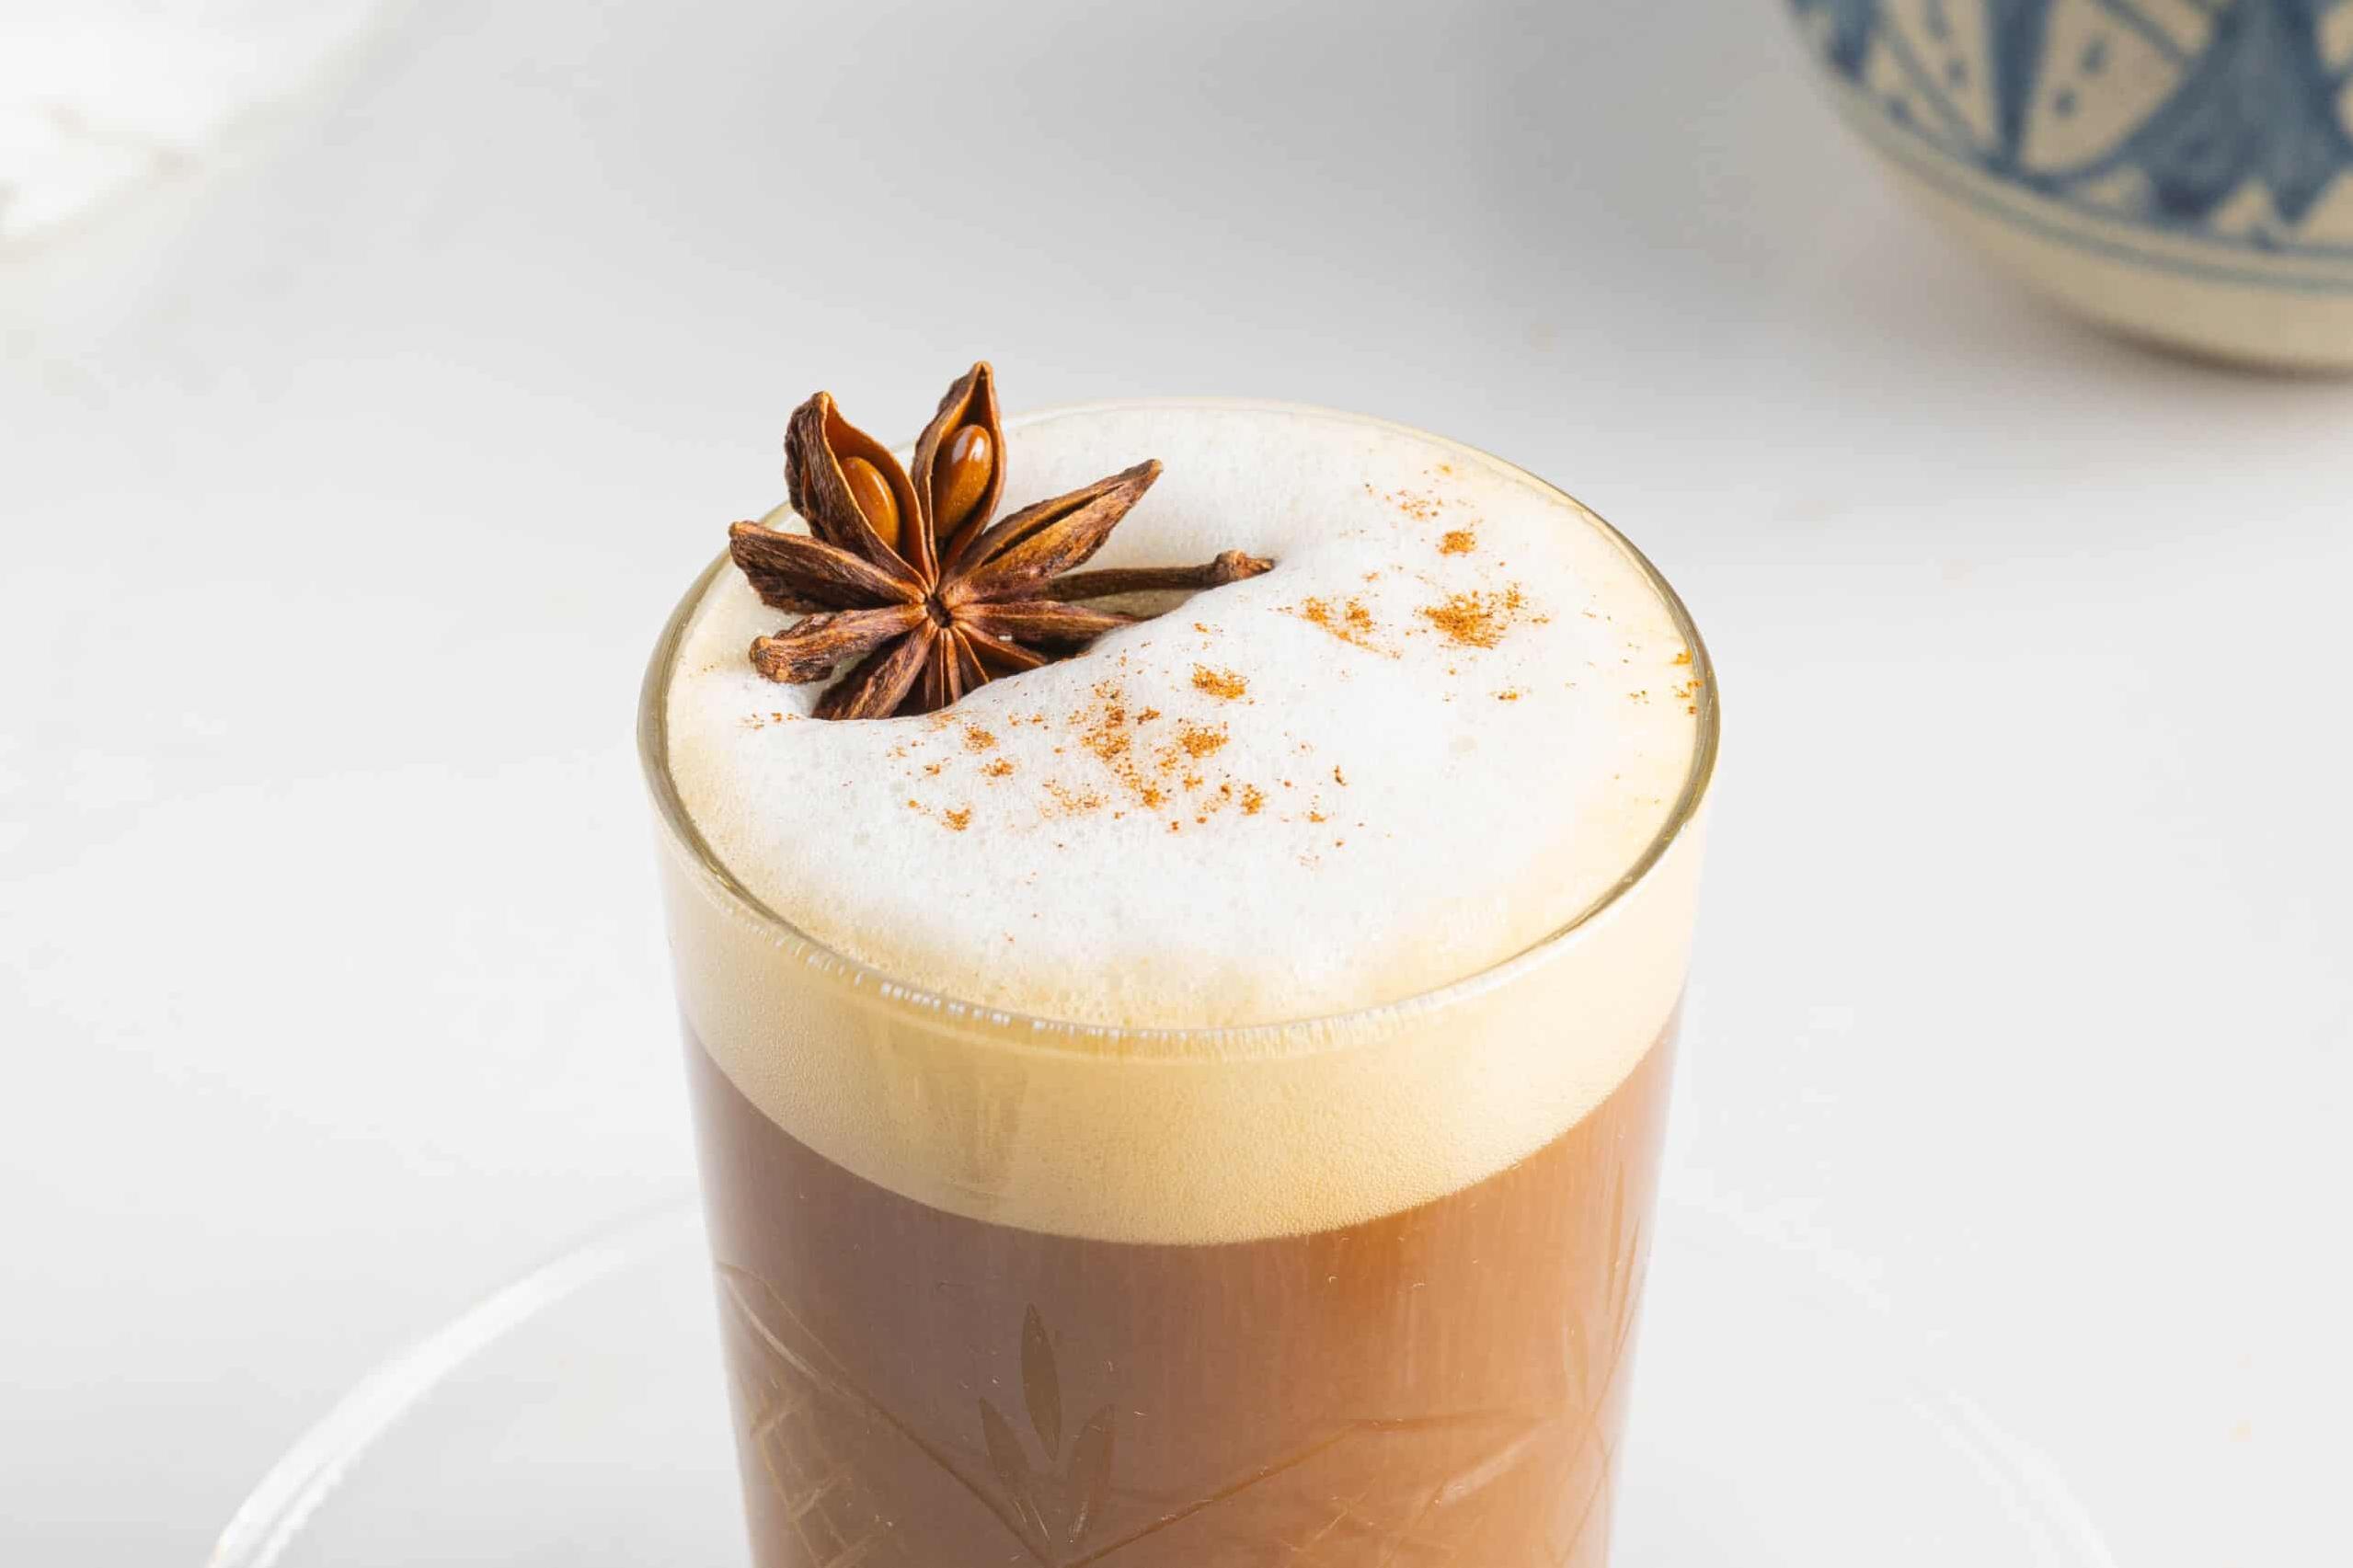  Indulge in the exotic flavors of this coffee recipe